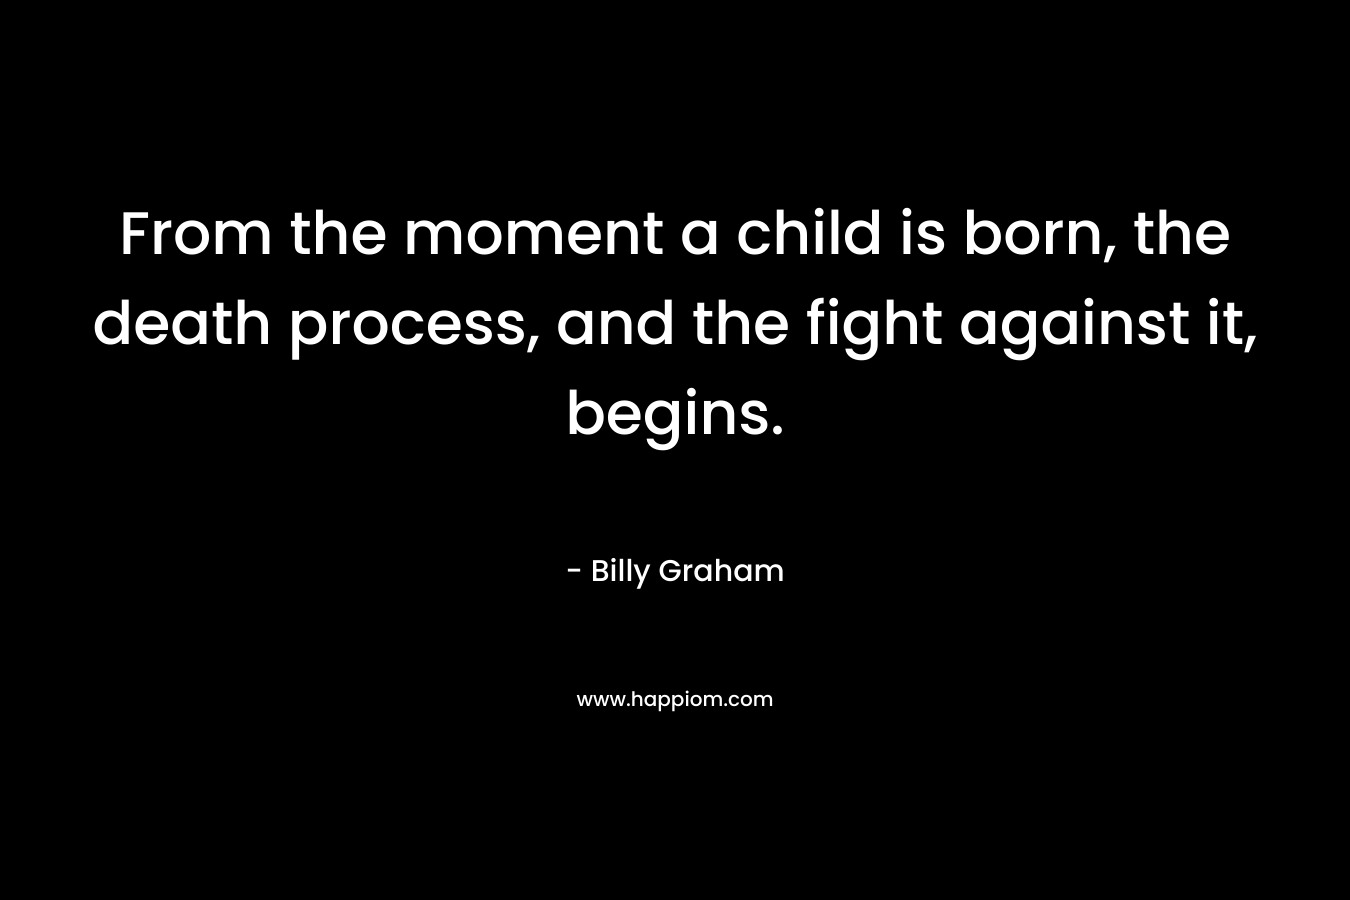 From the moment a child is born, the death process, and the fight against it, begins.